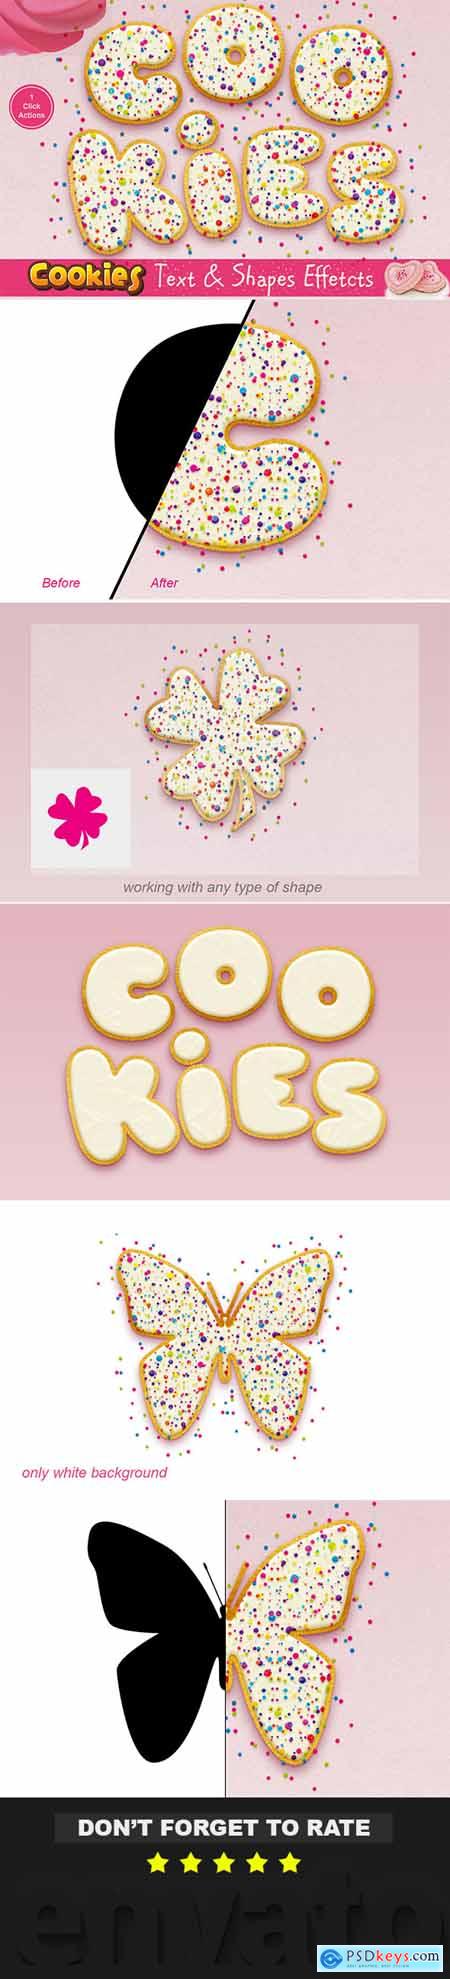 Graphicriver Cookies Text Effect Photoshop Action